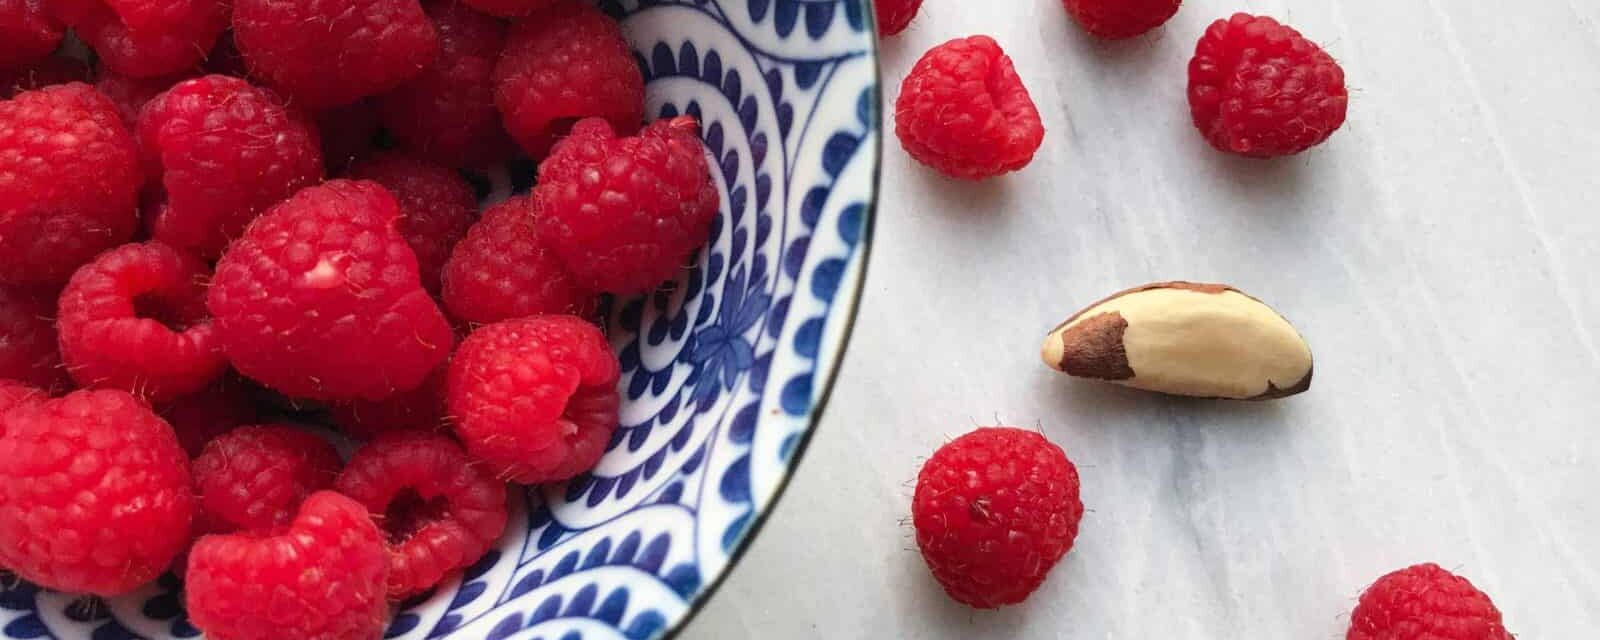 CARE Snack: Raspberries with Brazil Nuts